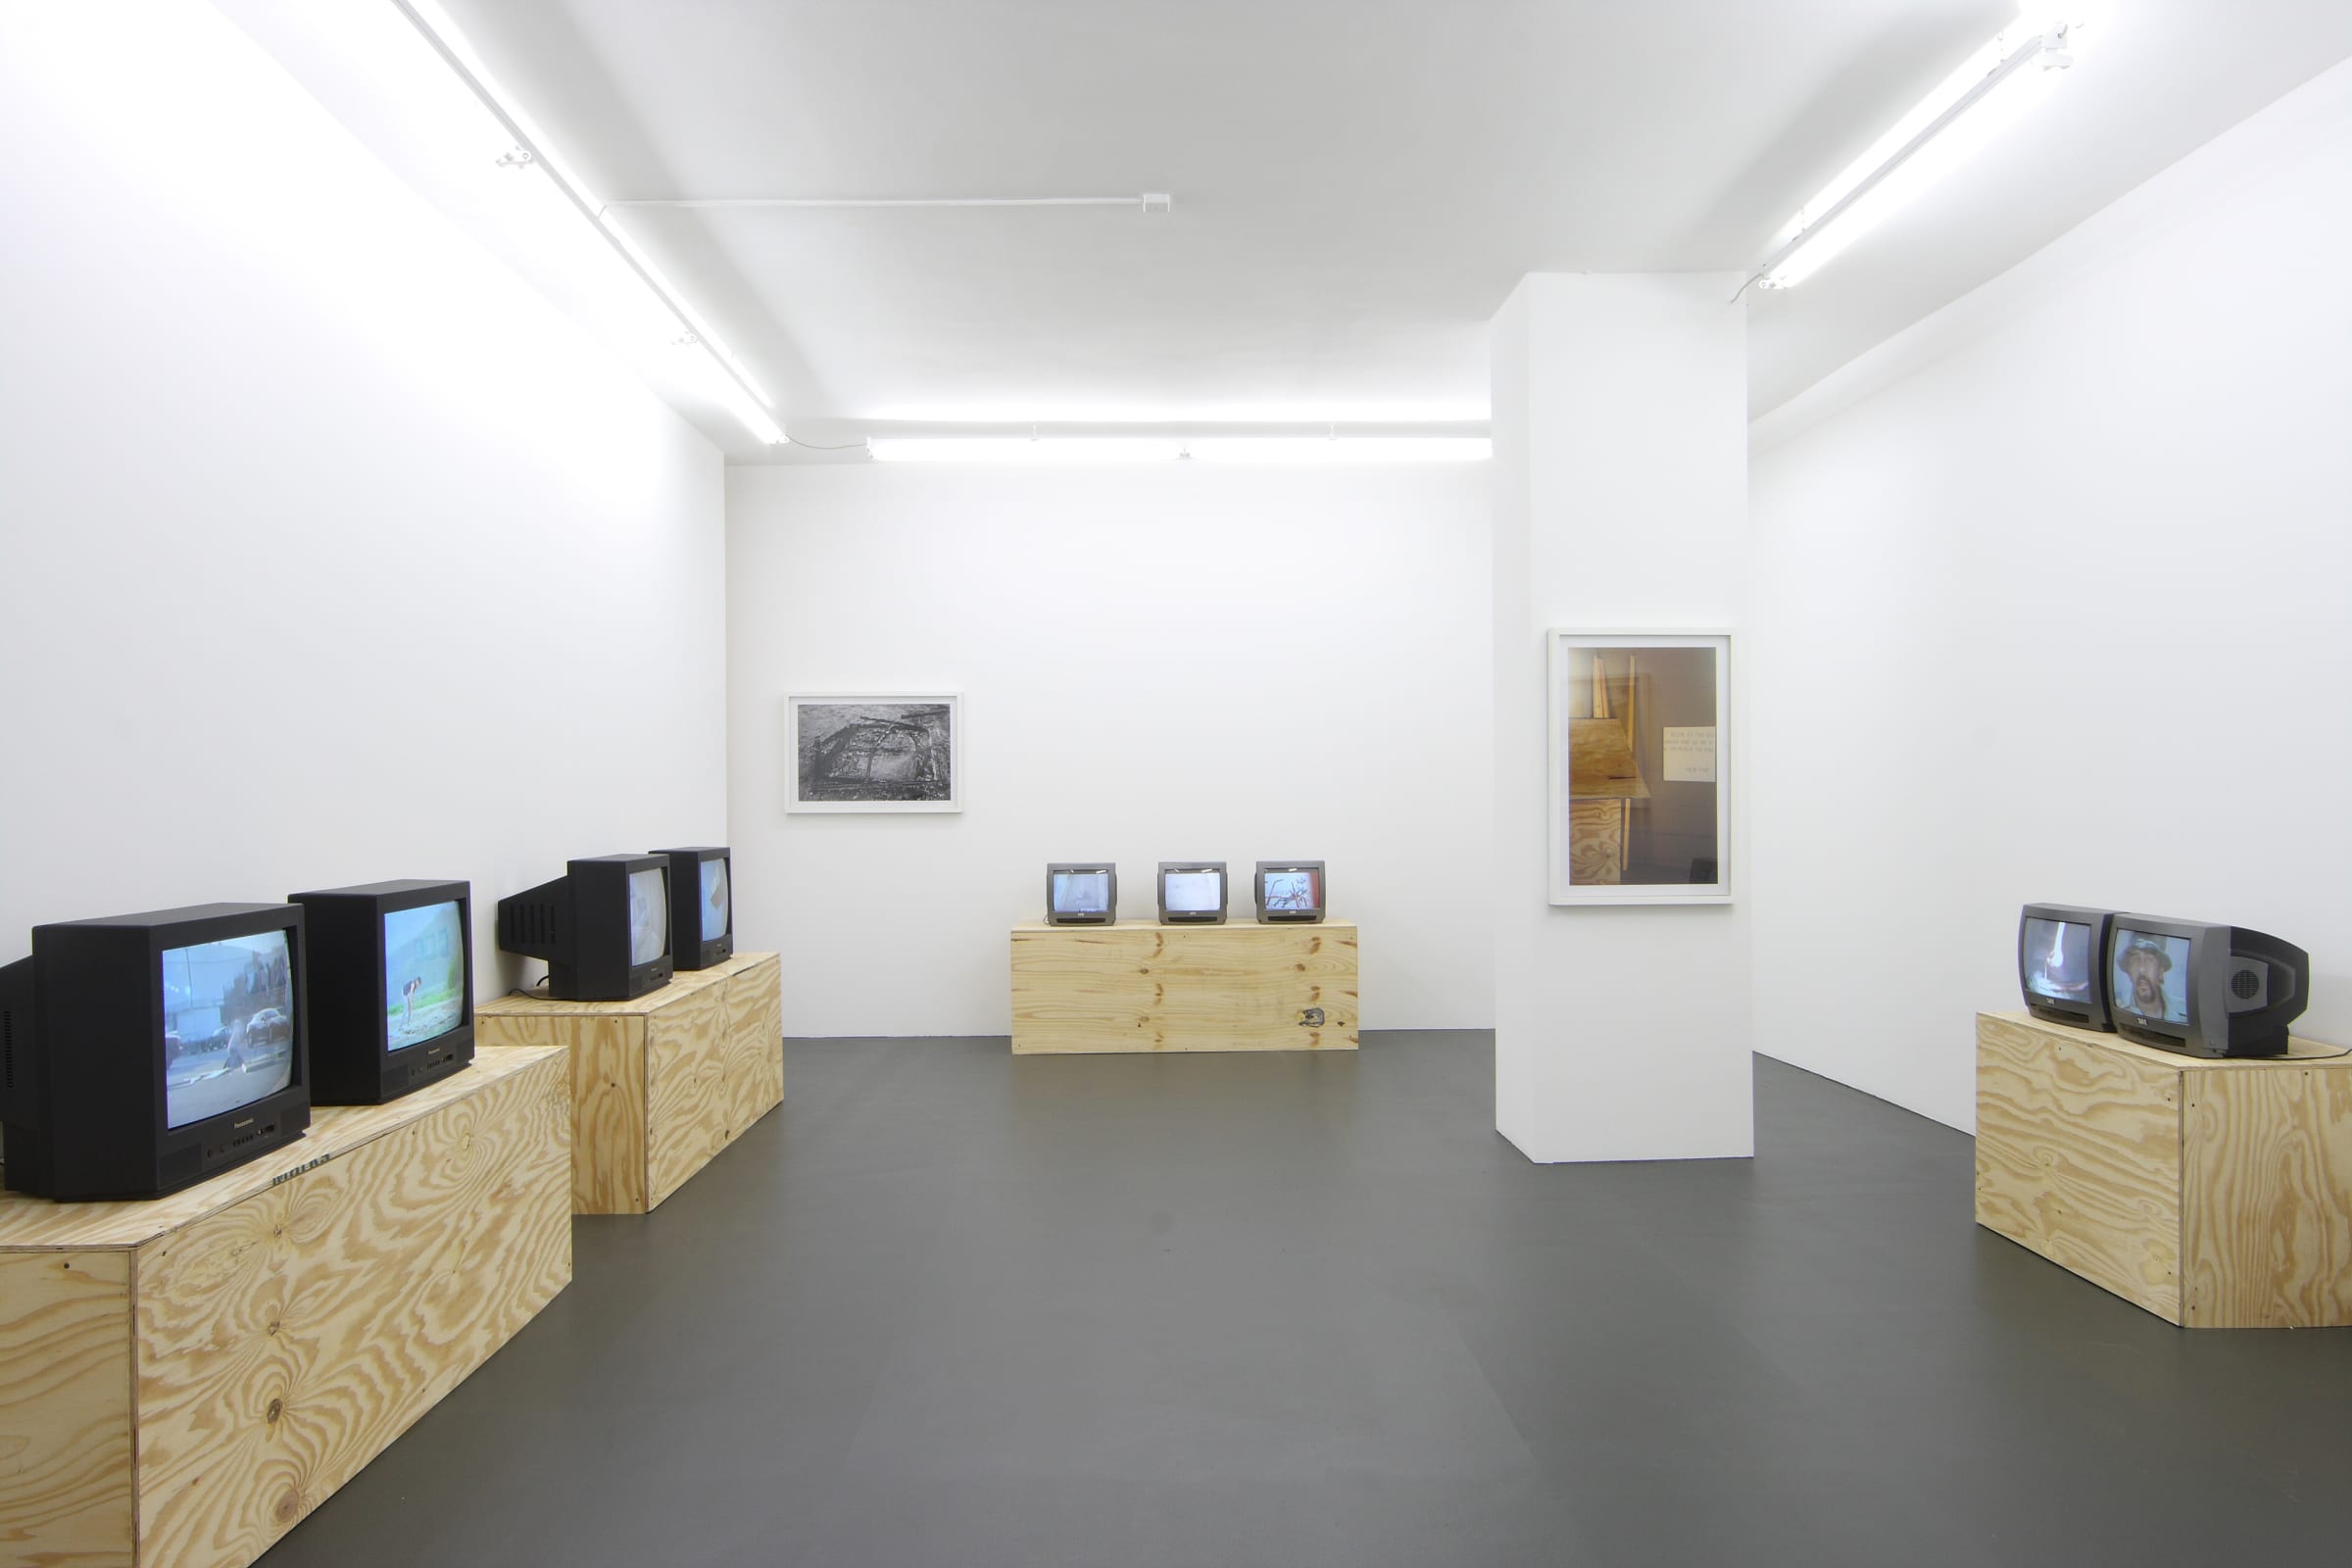 James Franco The Dangerous Book Four Boys Installation View February 12 – April 22, 2011 Peres Projects, Berlin